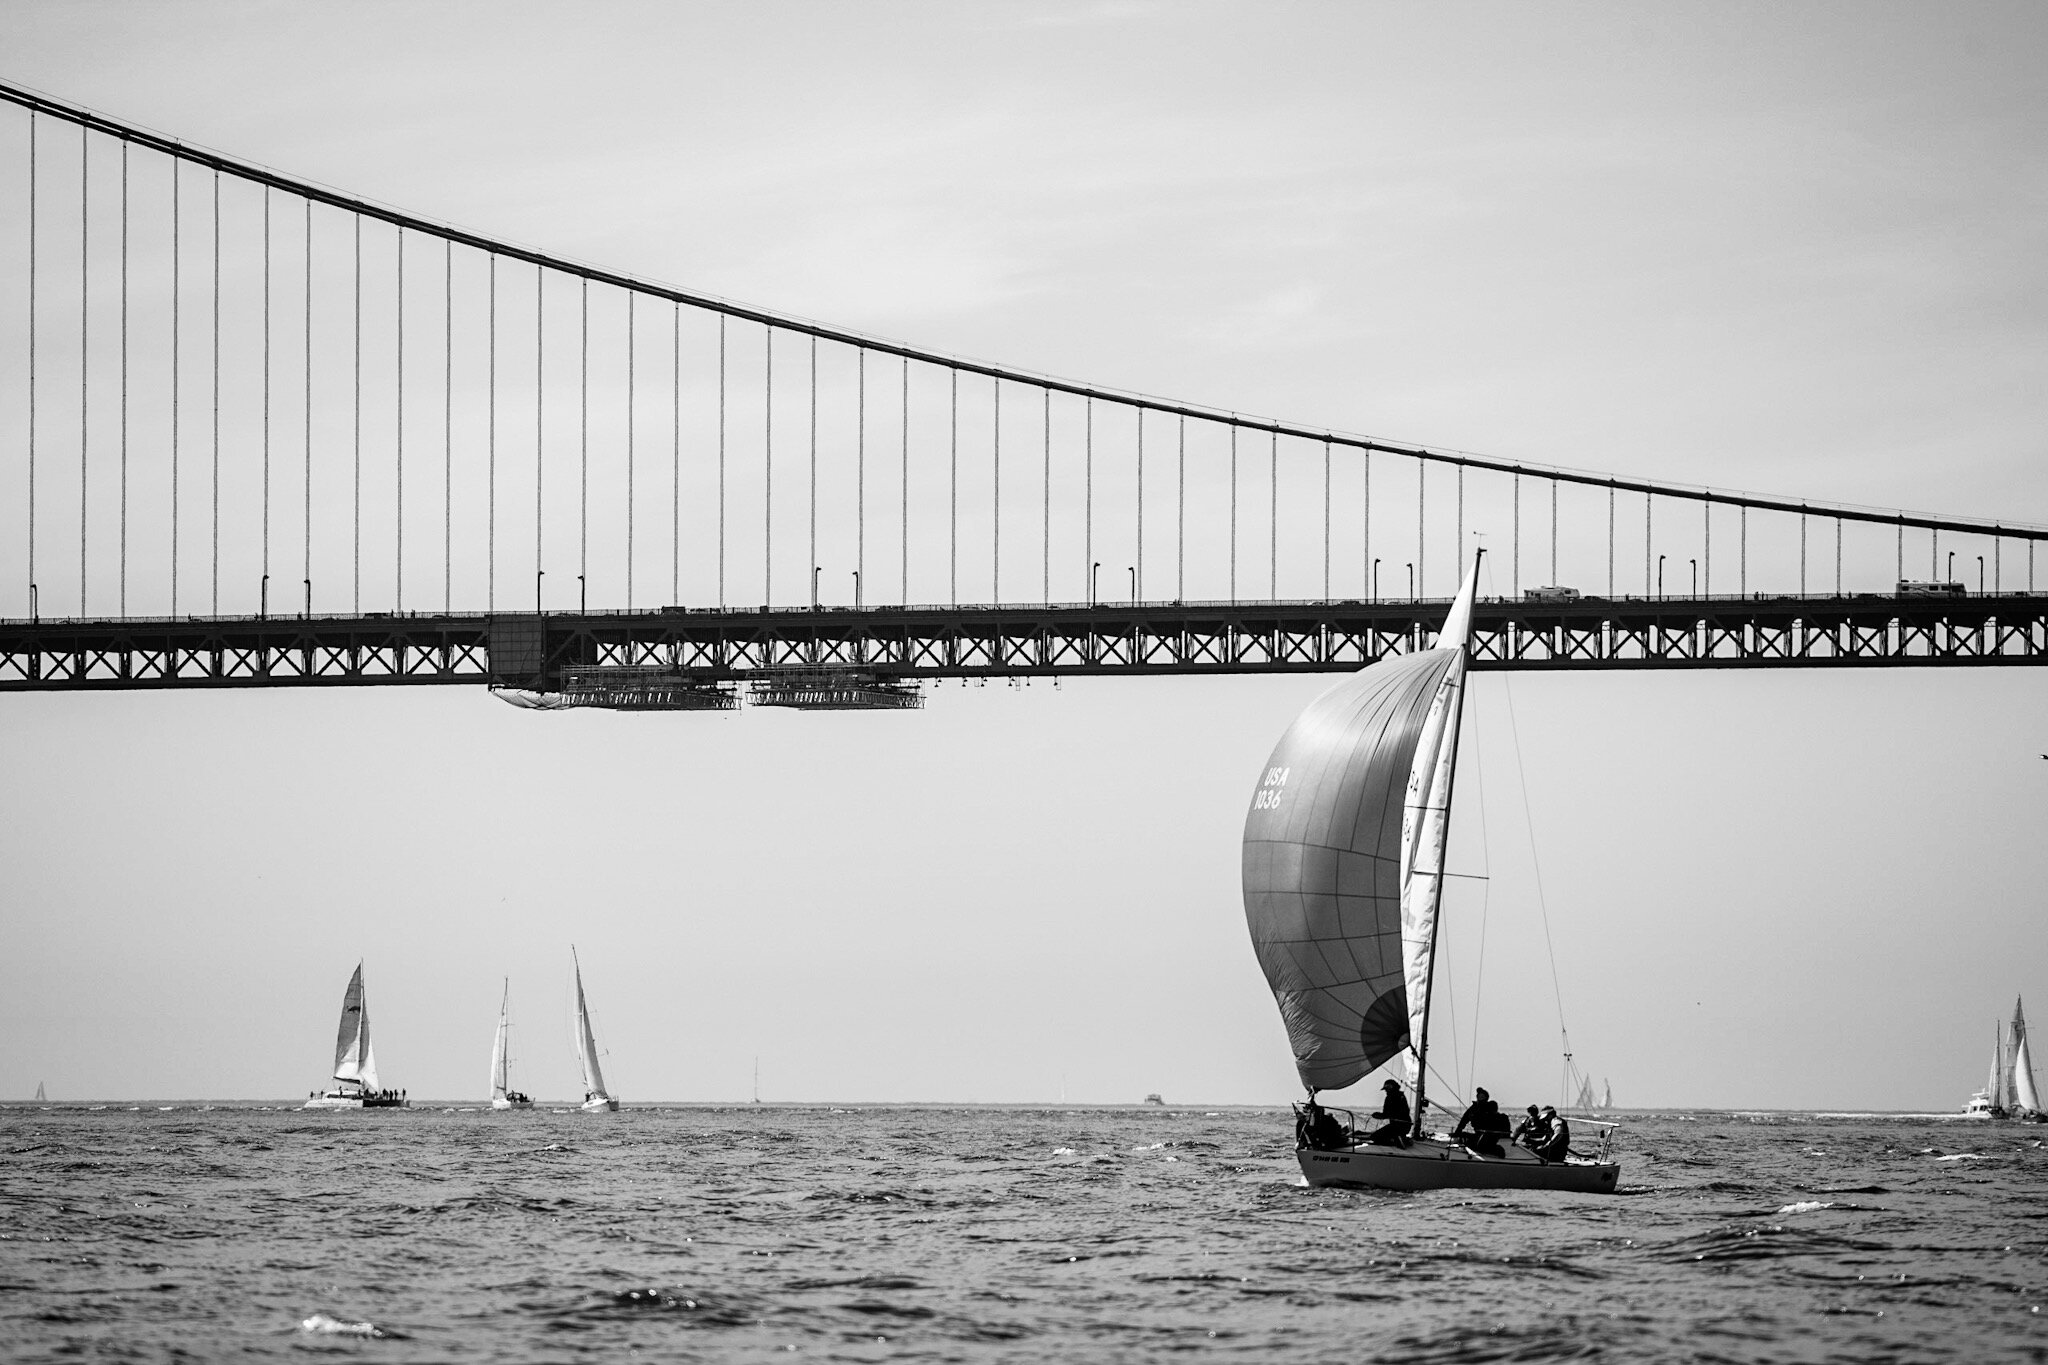  A lone J24 with spinnaker out, cutting across the Golden Gate Bridge 